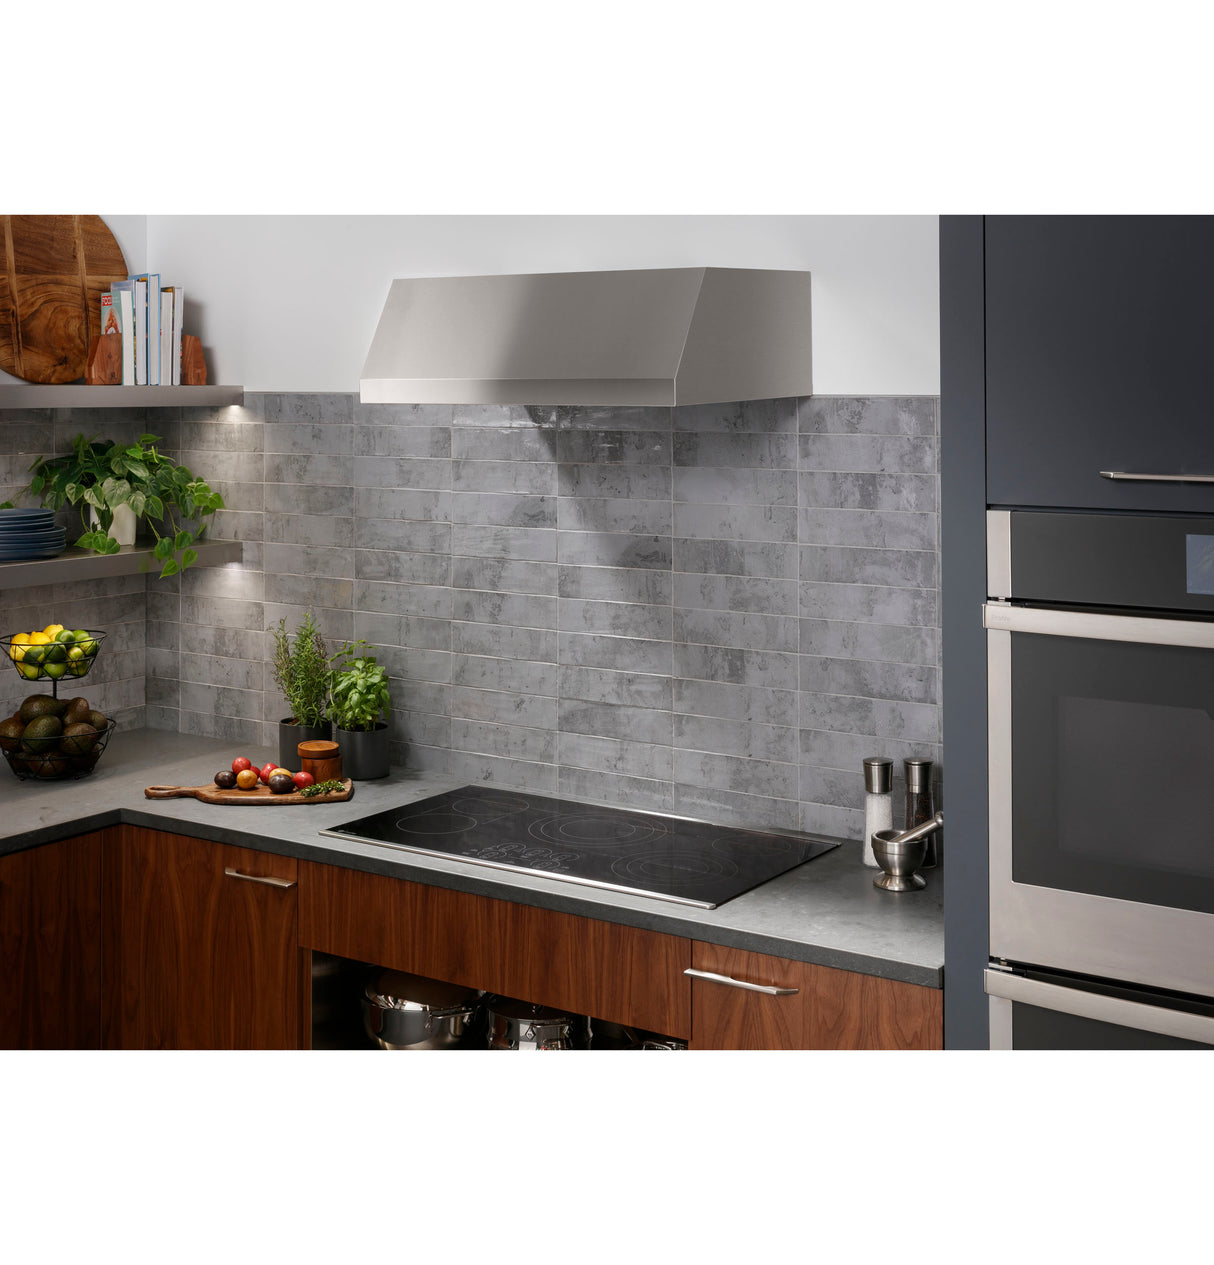 GE Profile(TM) 36" Built-In Touch Control Cooktop - (PEP9036STSS)